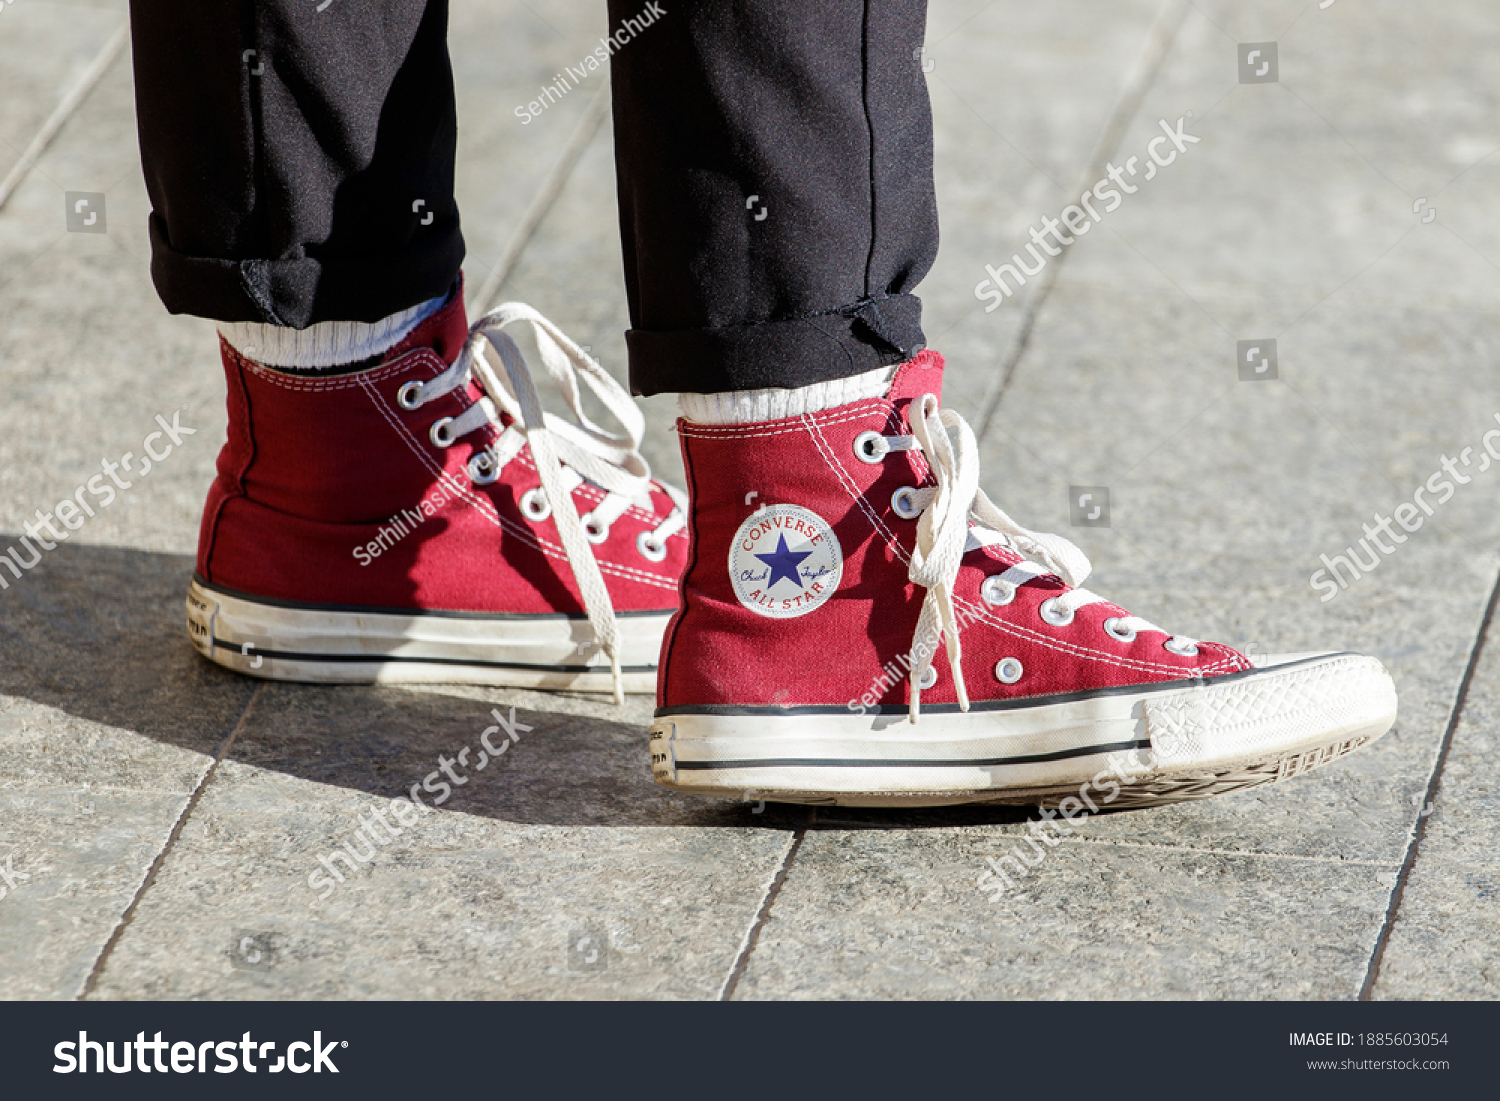 1,985 Converse all star Images, Stock Photos  Vectors | Shutterstock